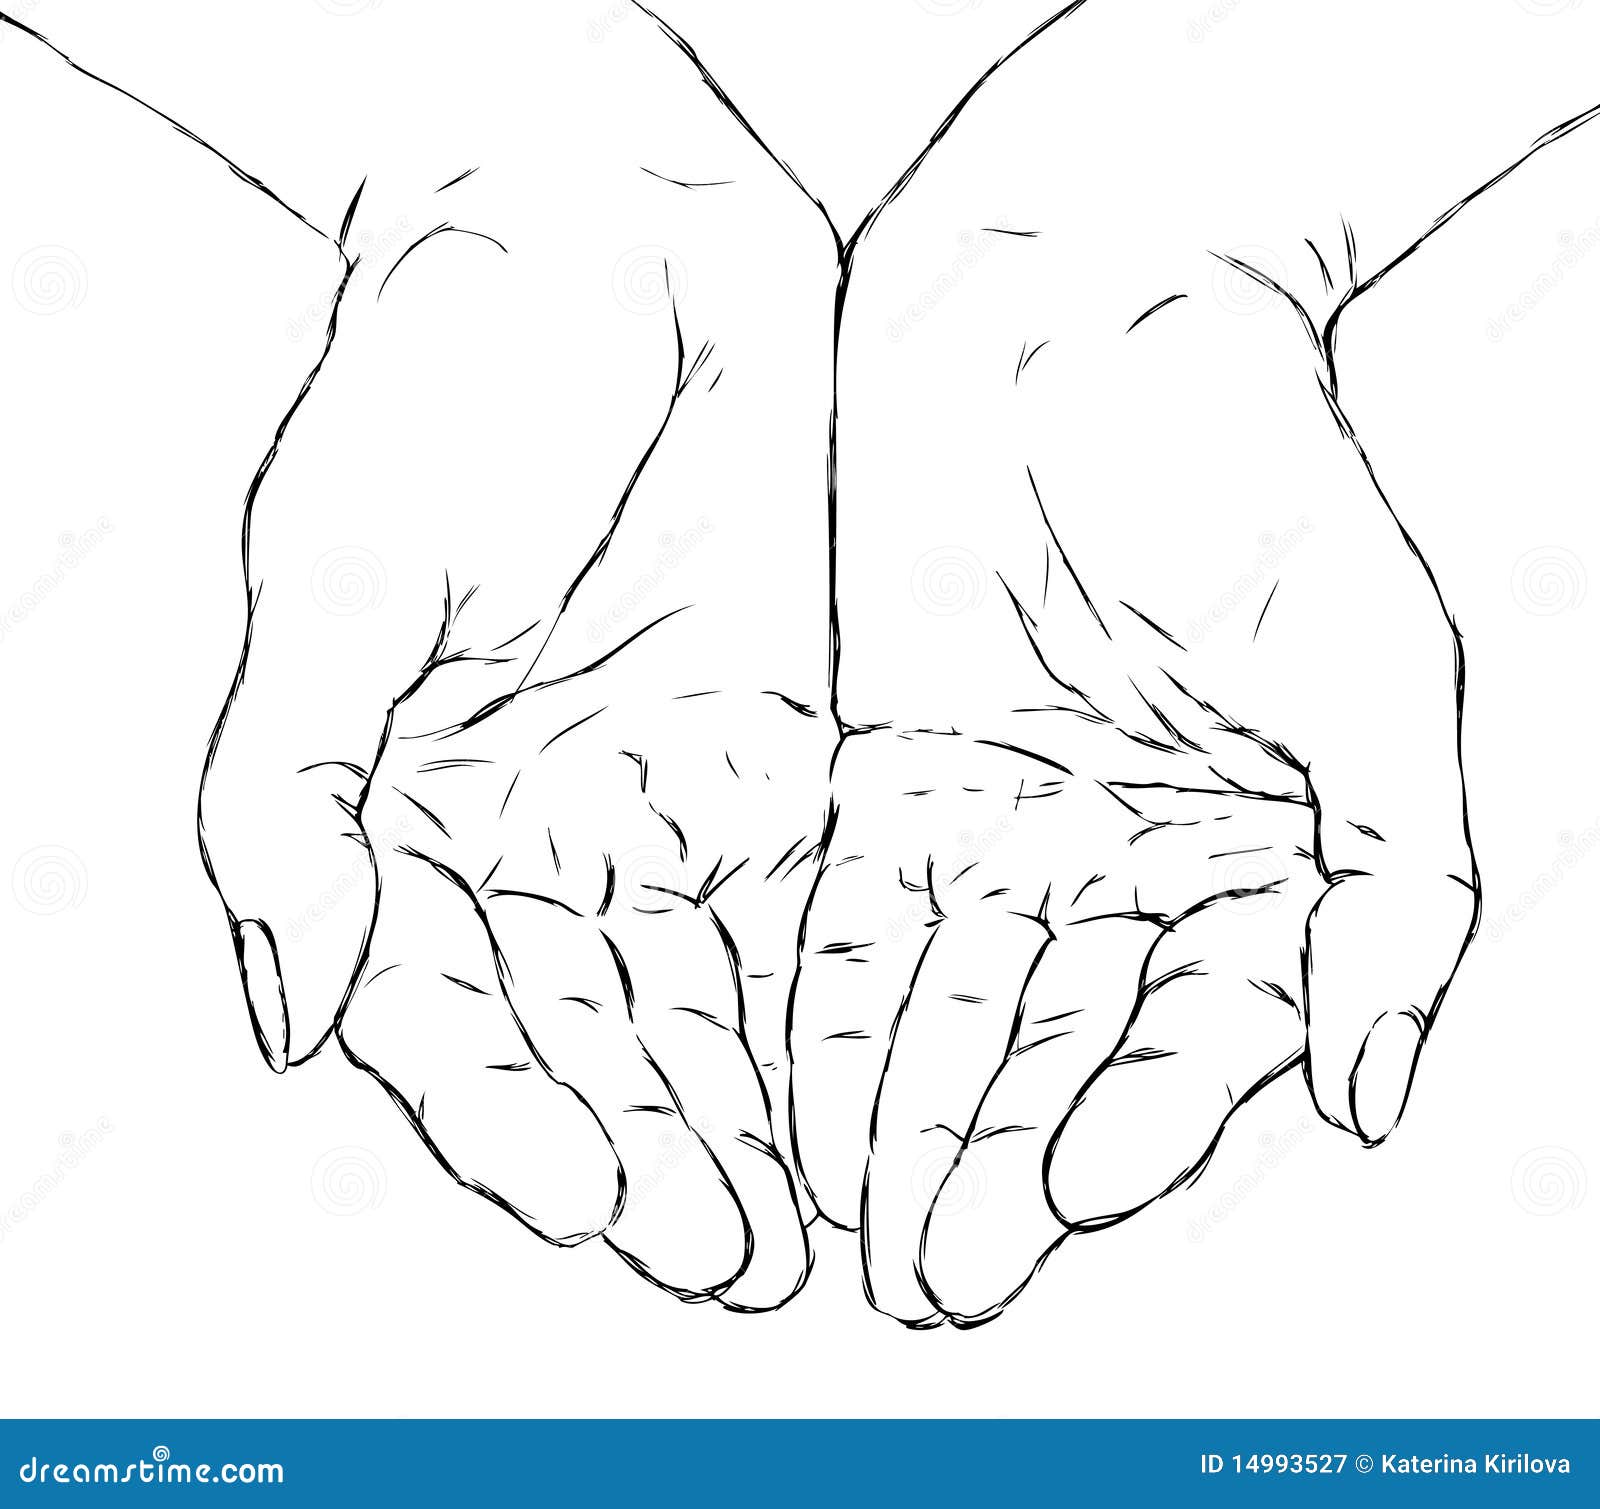 Cupped Hands Royalty Free Stock Photography - Image: 14993527